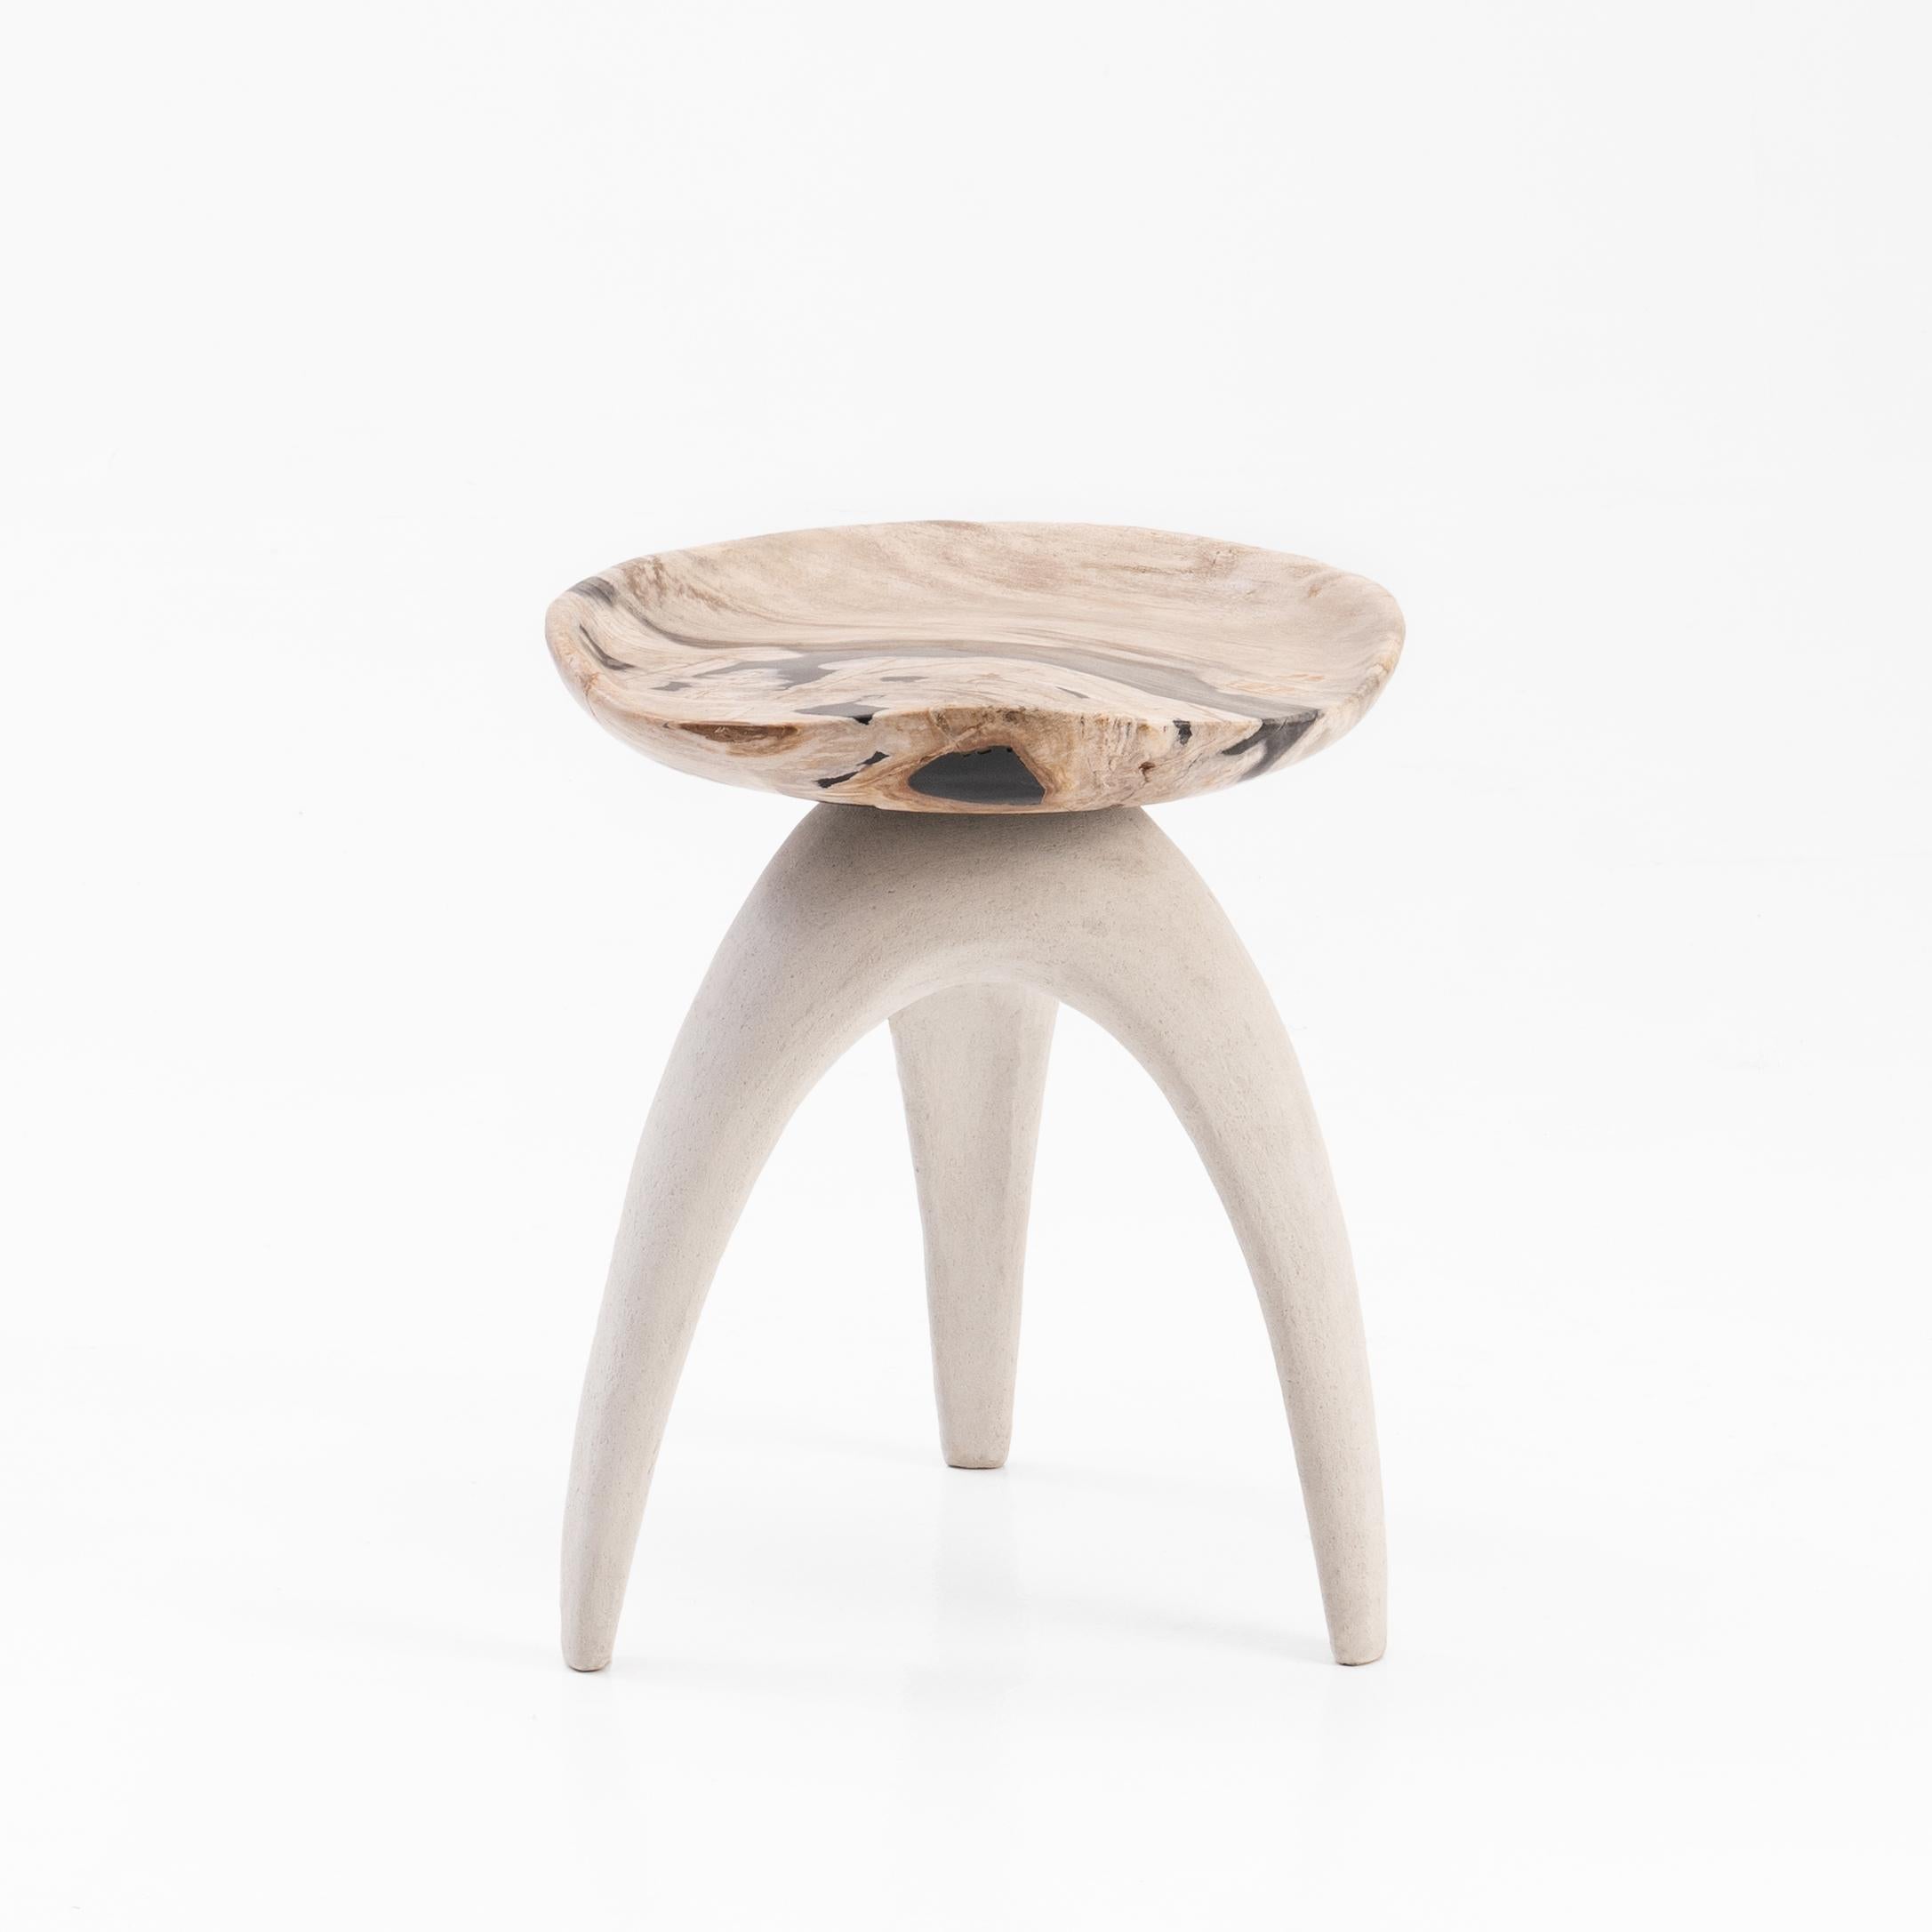 Bermuda Triangle Stool by Odditi
Dimensions: D 42 x H 46 cm
Materials: Petrified Wood Sculpted Seat, Limestone Composite, Steel Base

The ‘Bermuda Triangle’ sculptural stool features a solid hand-carved petrified wood saddle seat, perched upon an